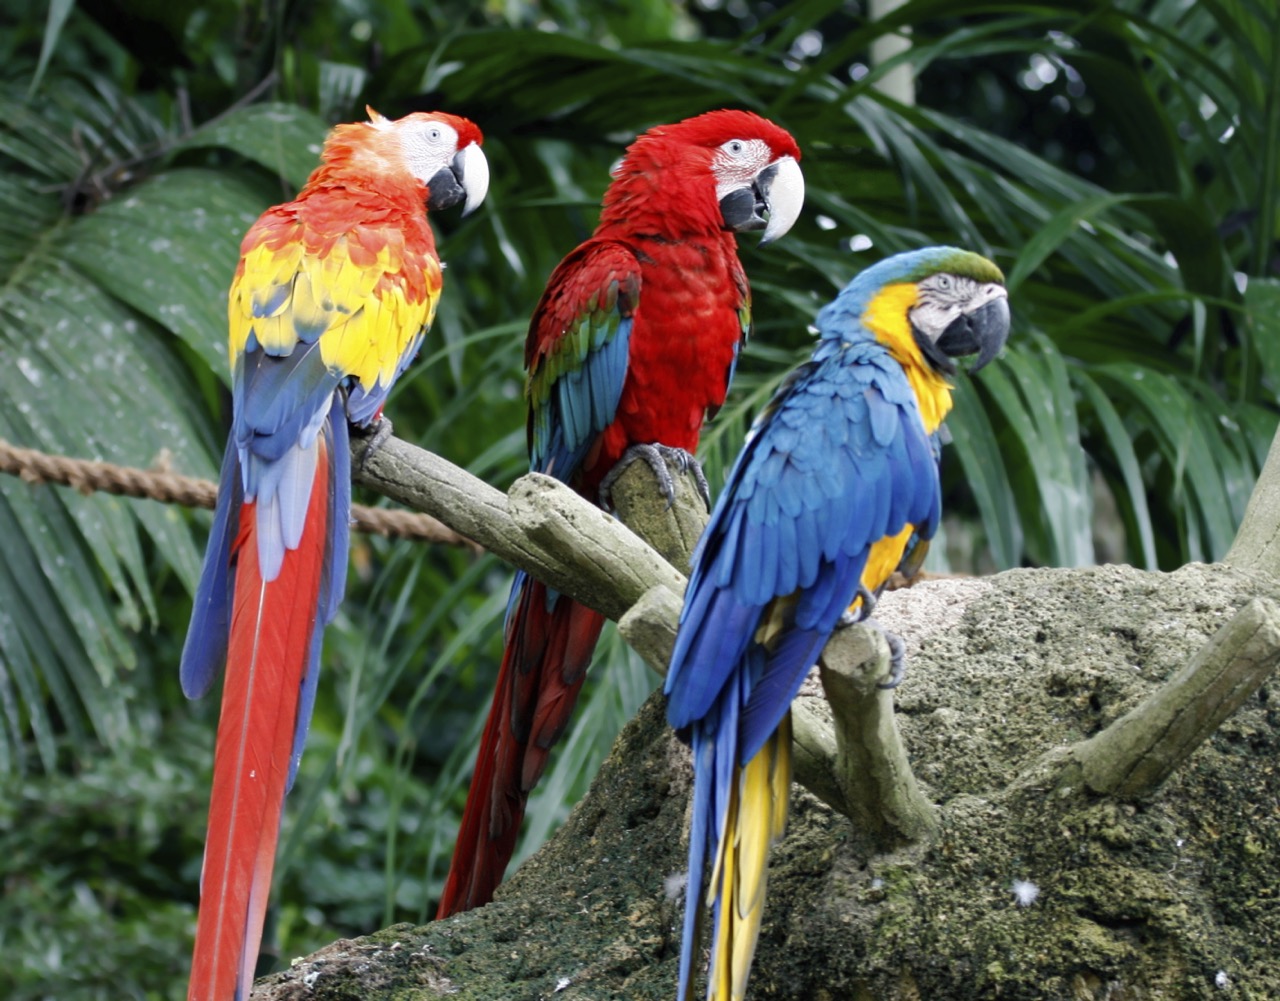 how are parrots adapted to the rainforest